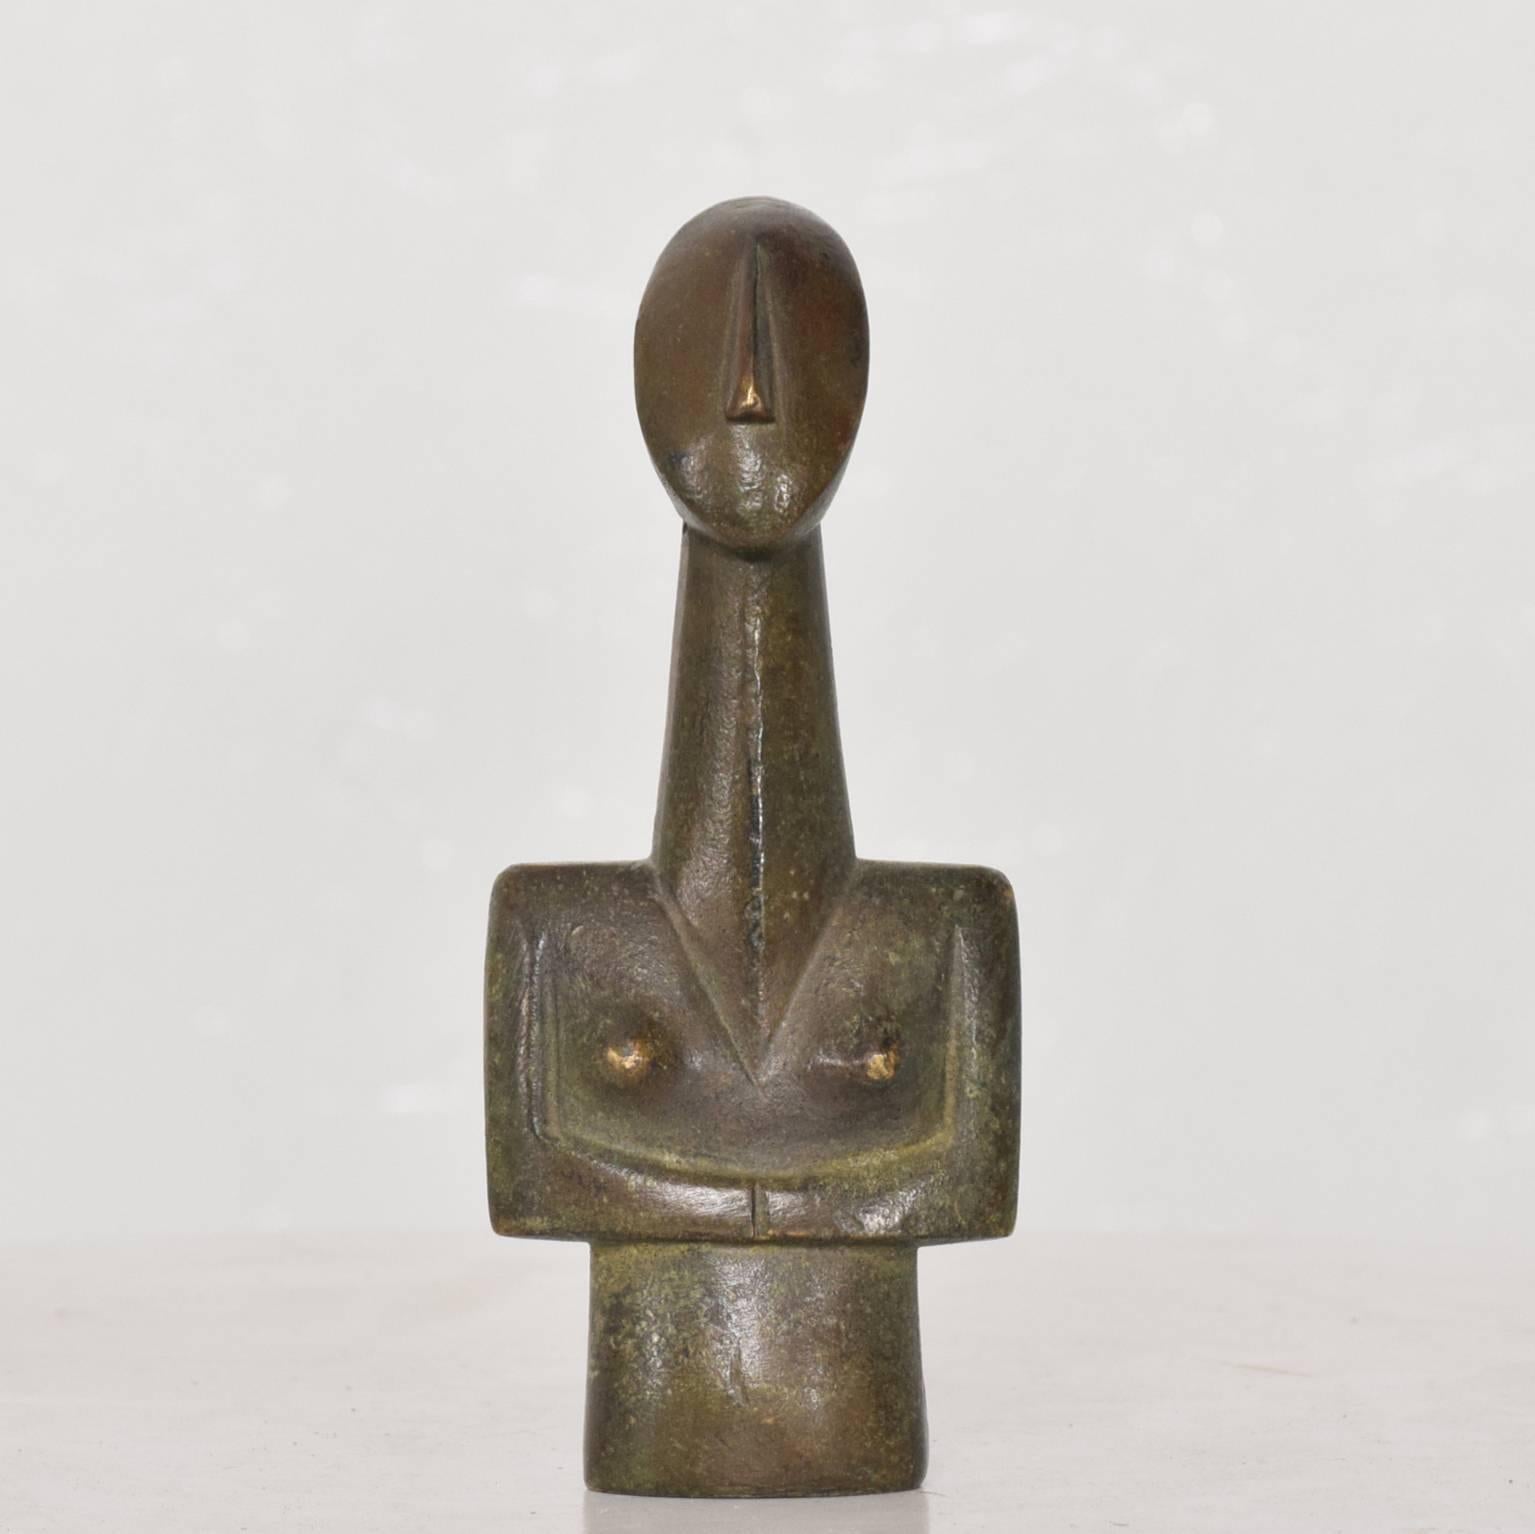 For your consideration a modern bronze sculpture "Fertility Goddess Statue" Giacometti style.

Unsigned.
Beautiful original patina. No markings from the artist present. 
Dimensions: 4 3/4" tall x 2" W x 1 1/2" D.